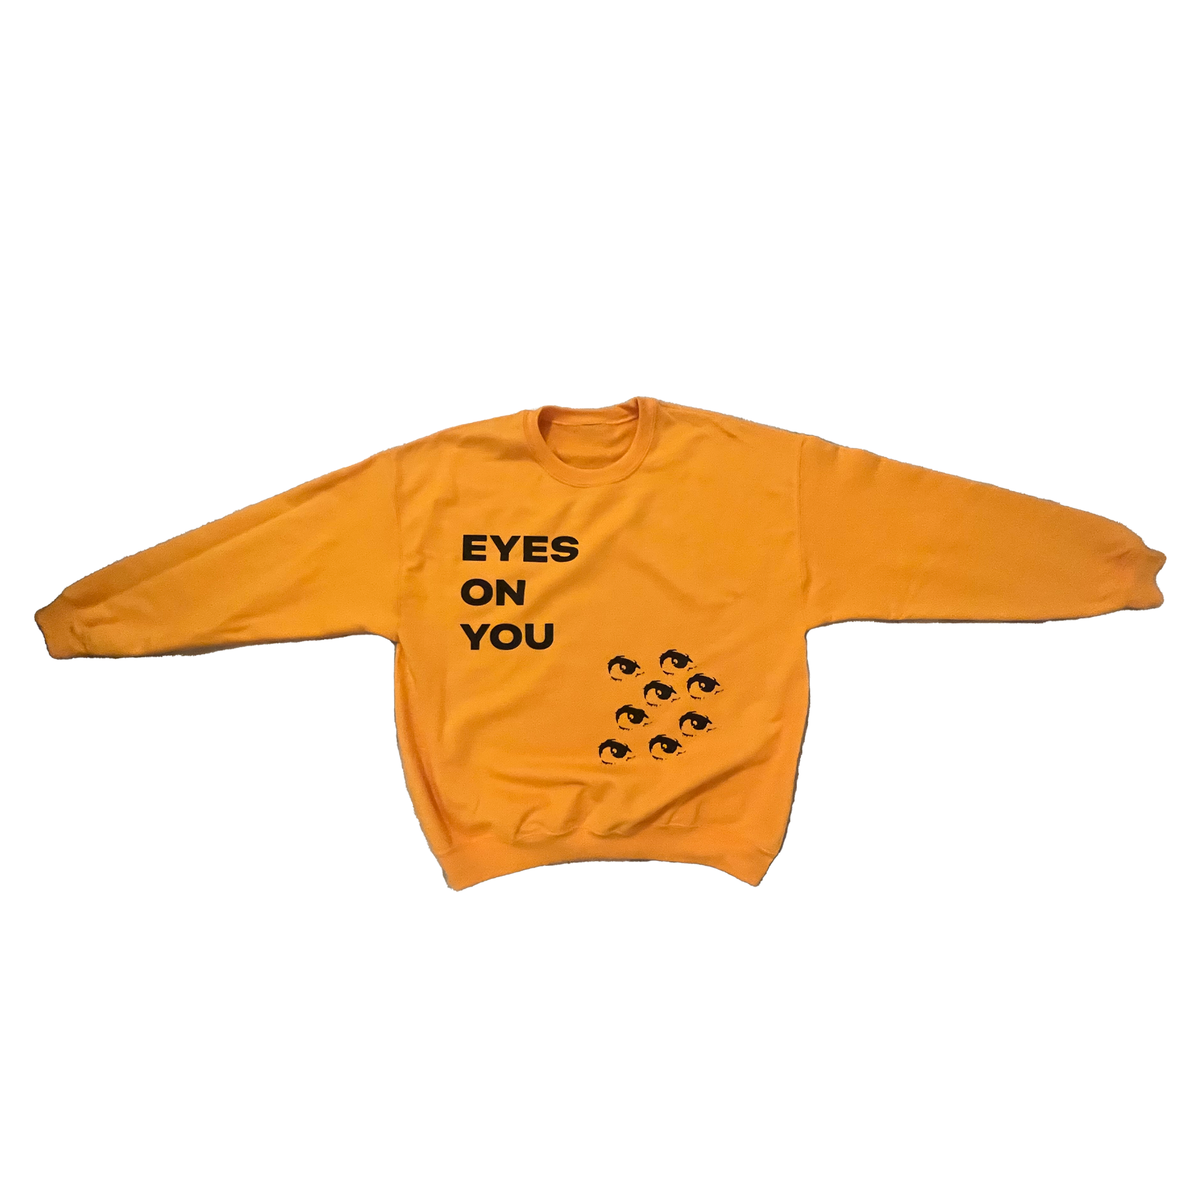 1/1 "EYES ON YOU" SWEATER